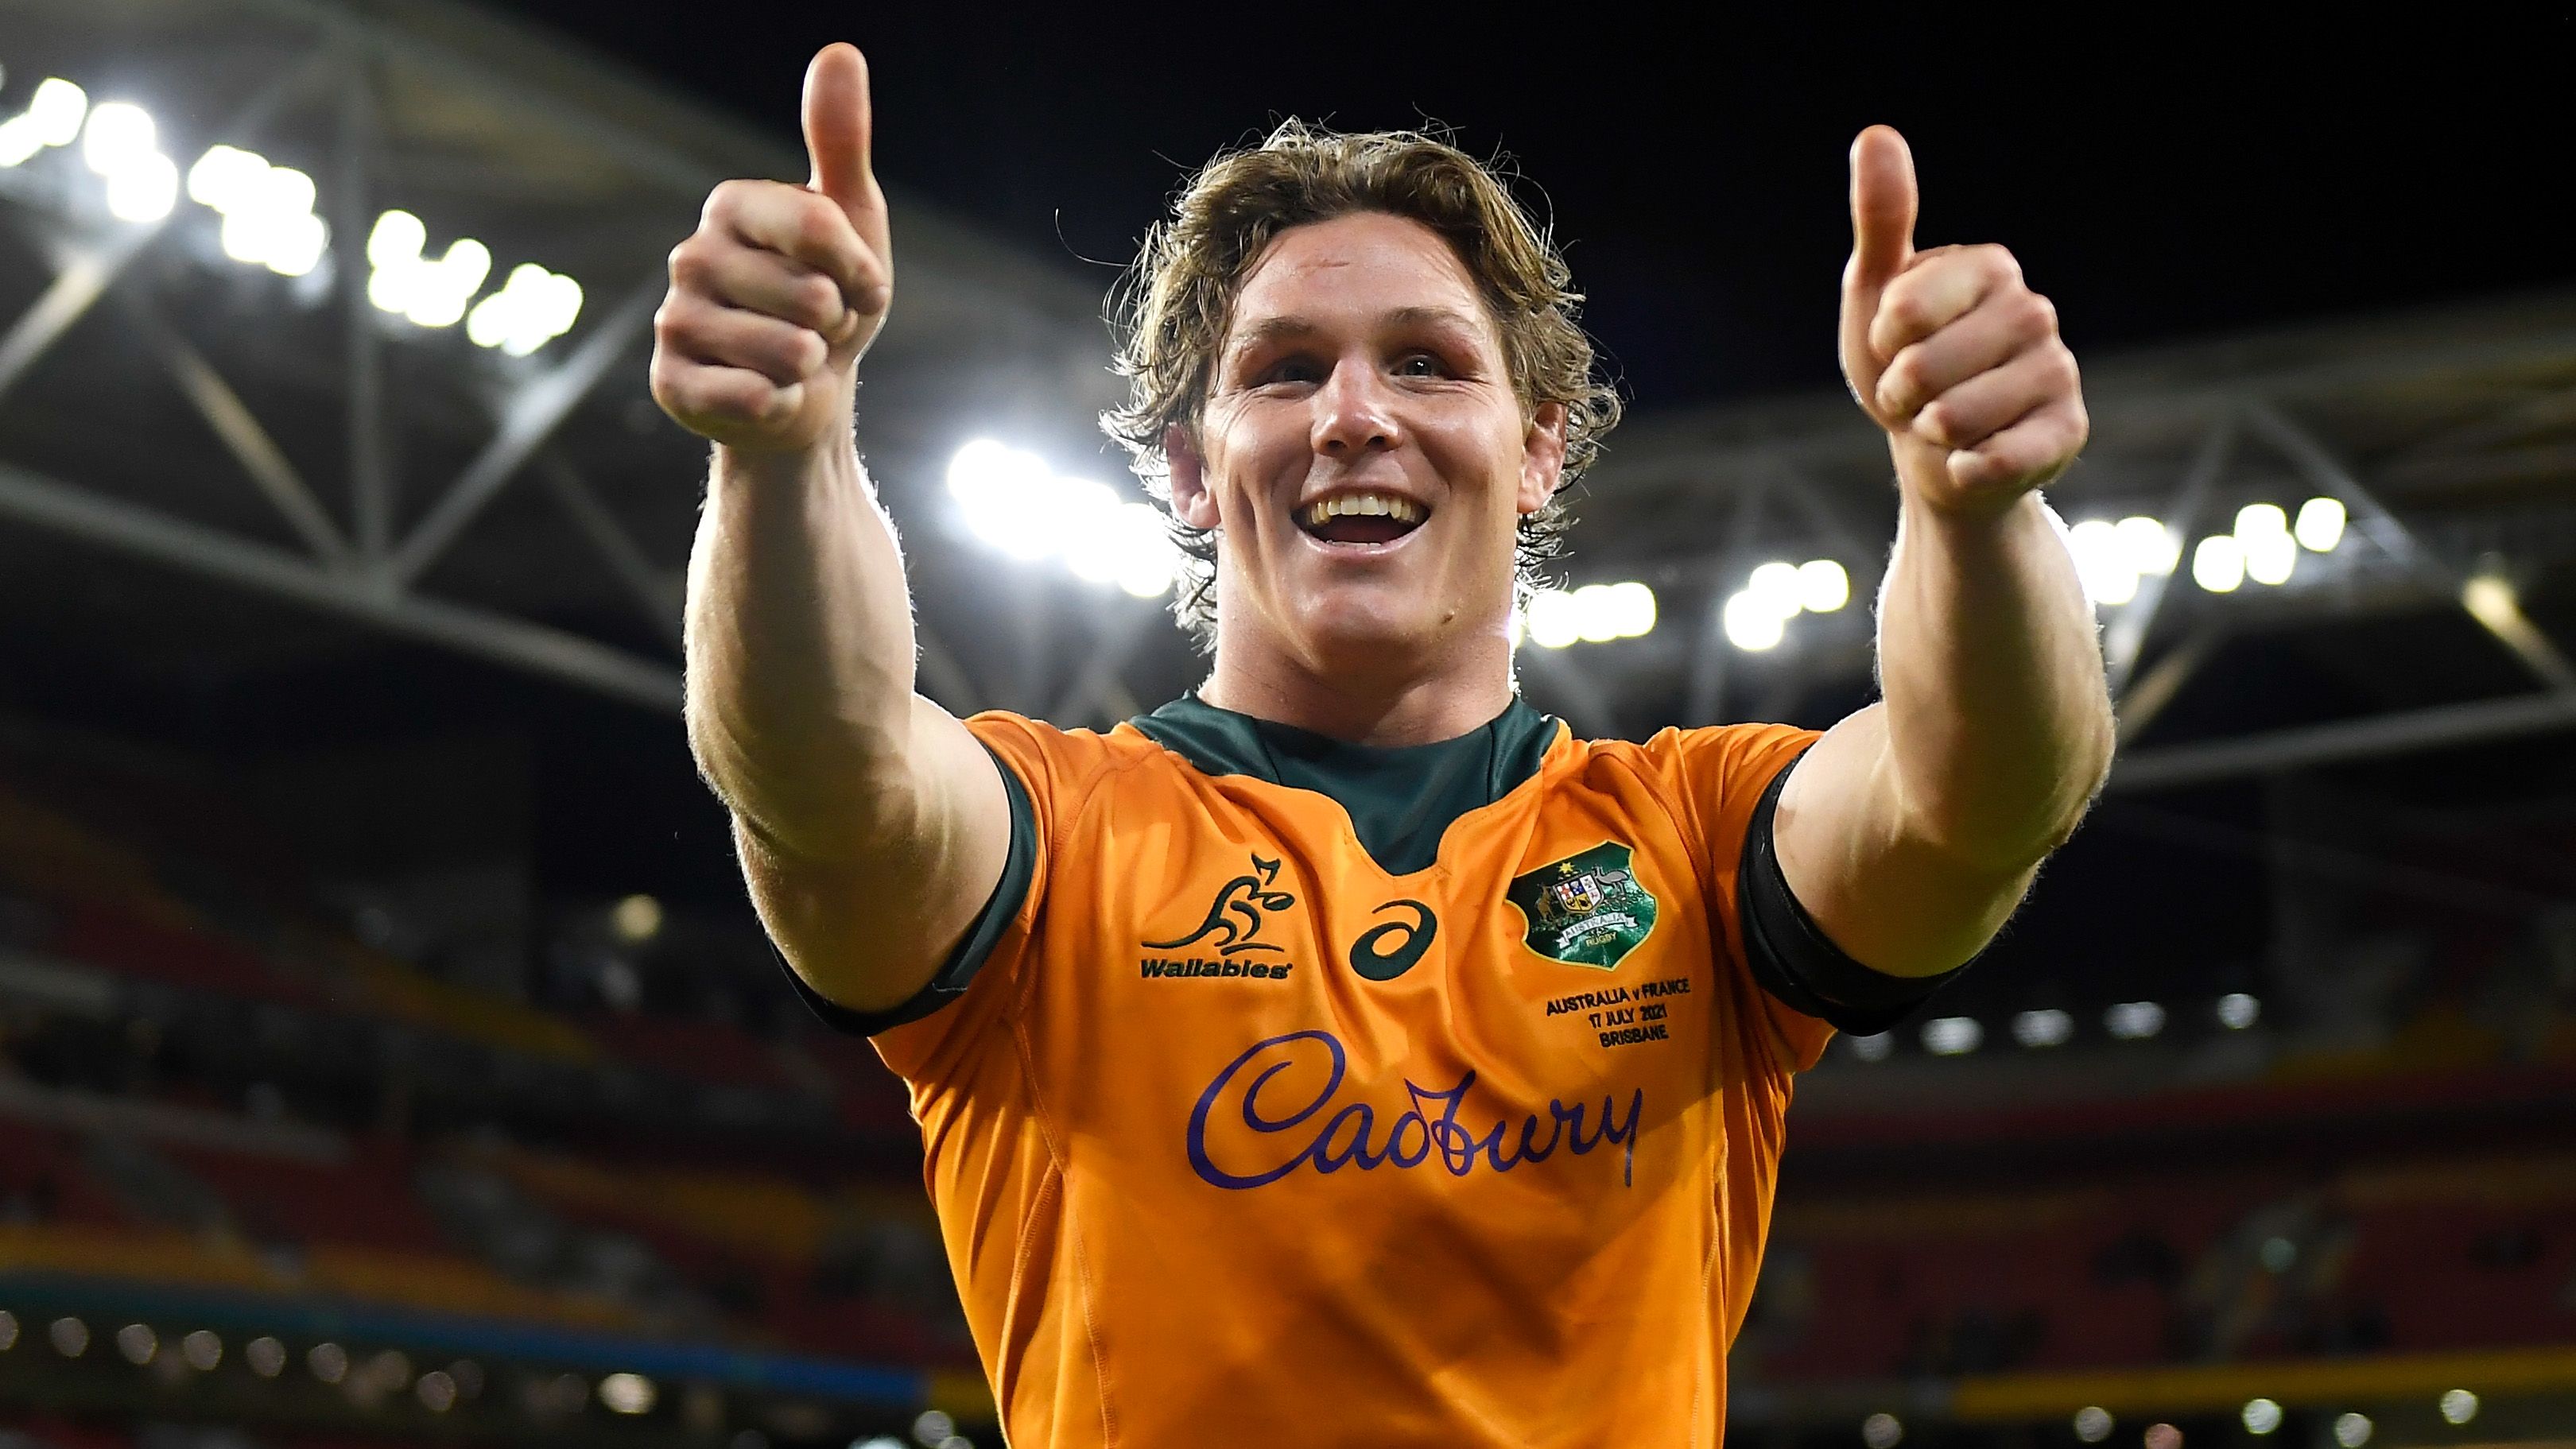 The Wallabies who can make world rugby history